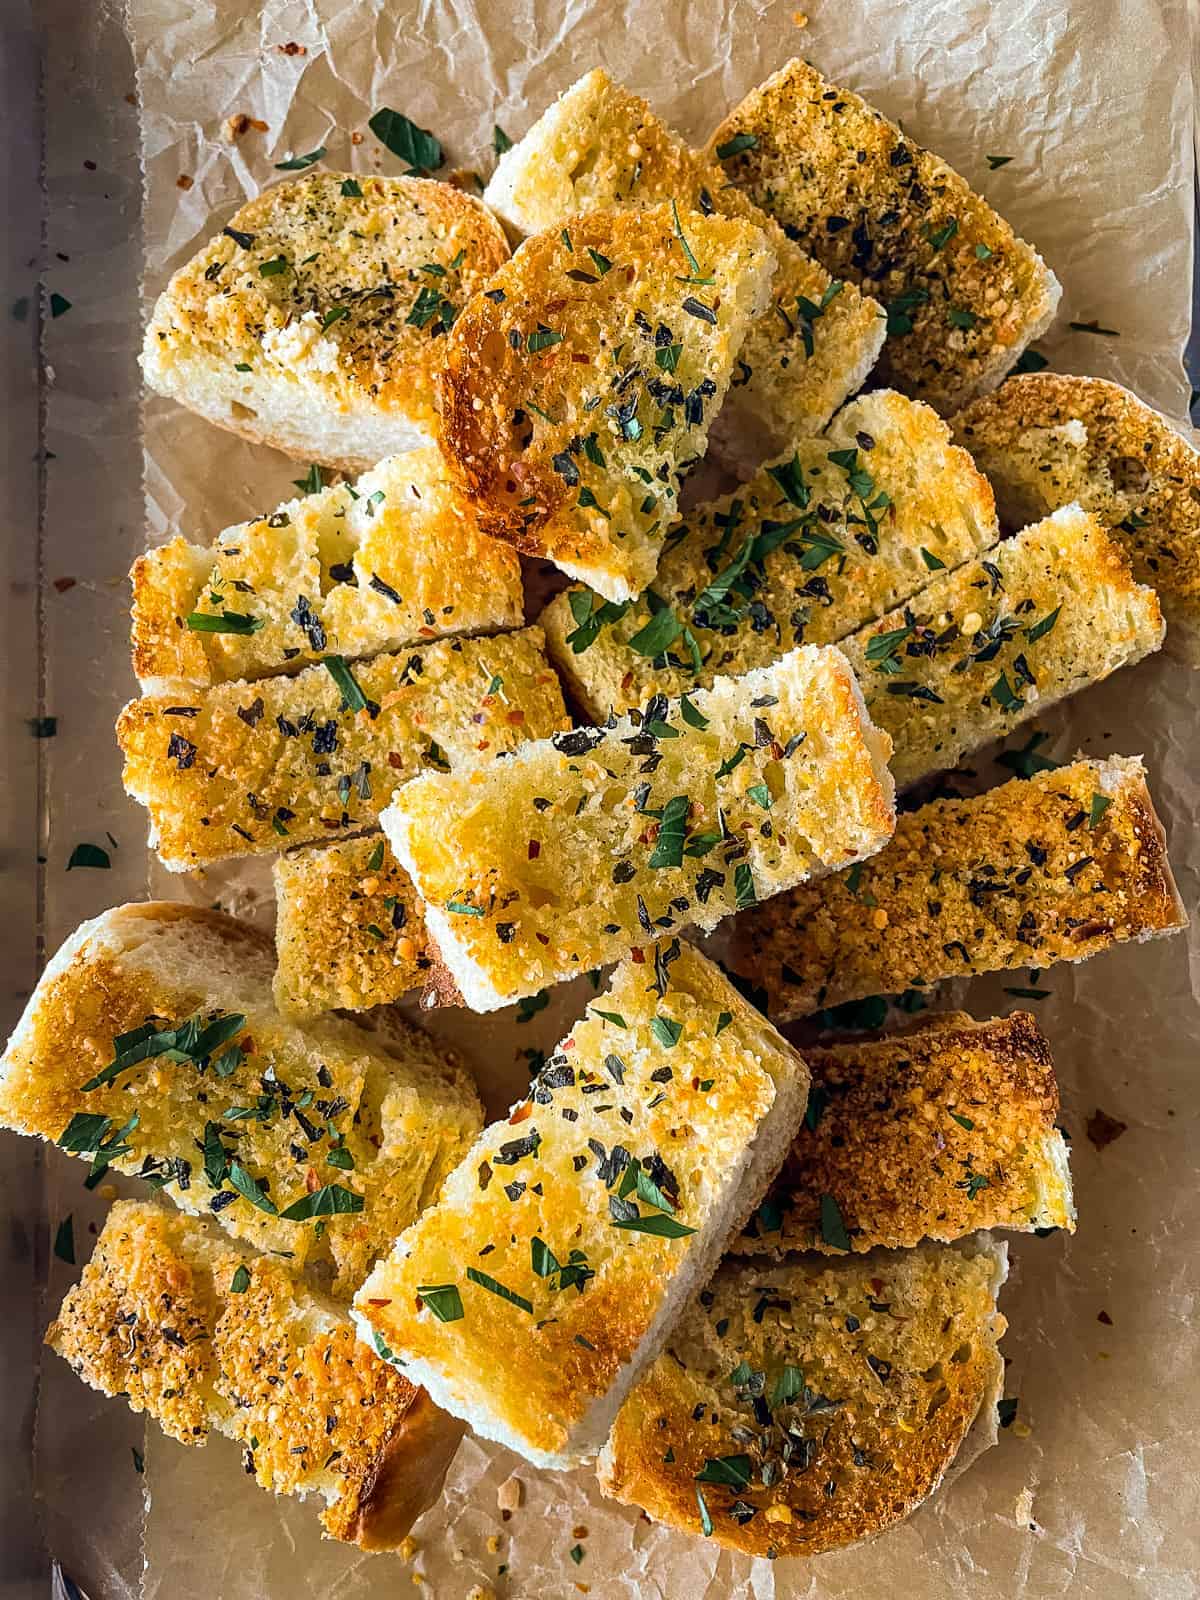 Sliced garlic bread on pan. Topped with fresh chopped parsley.